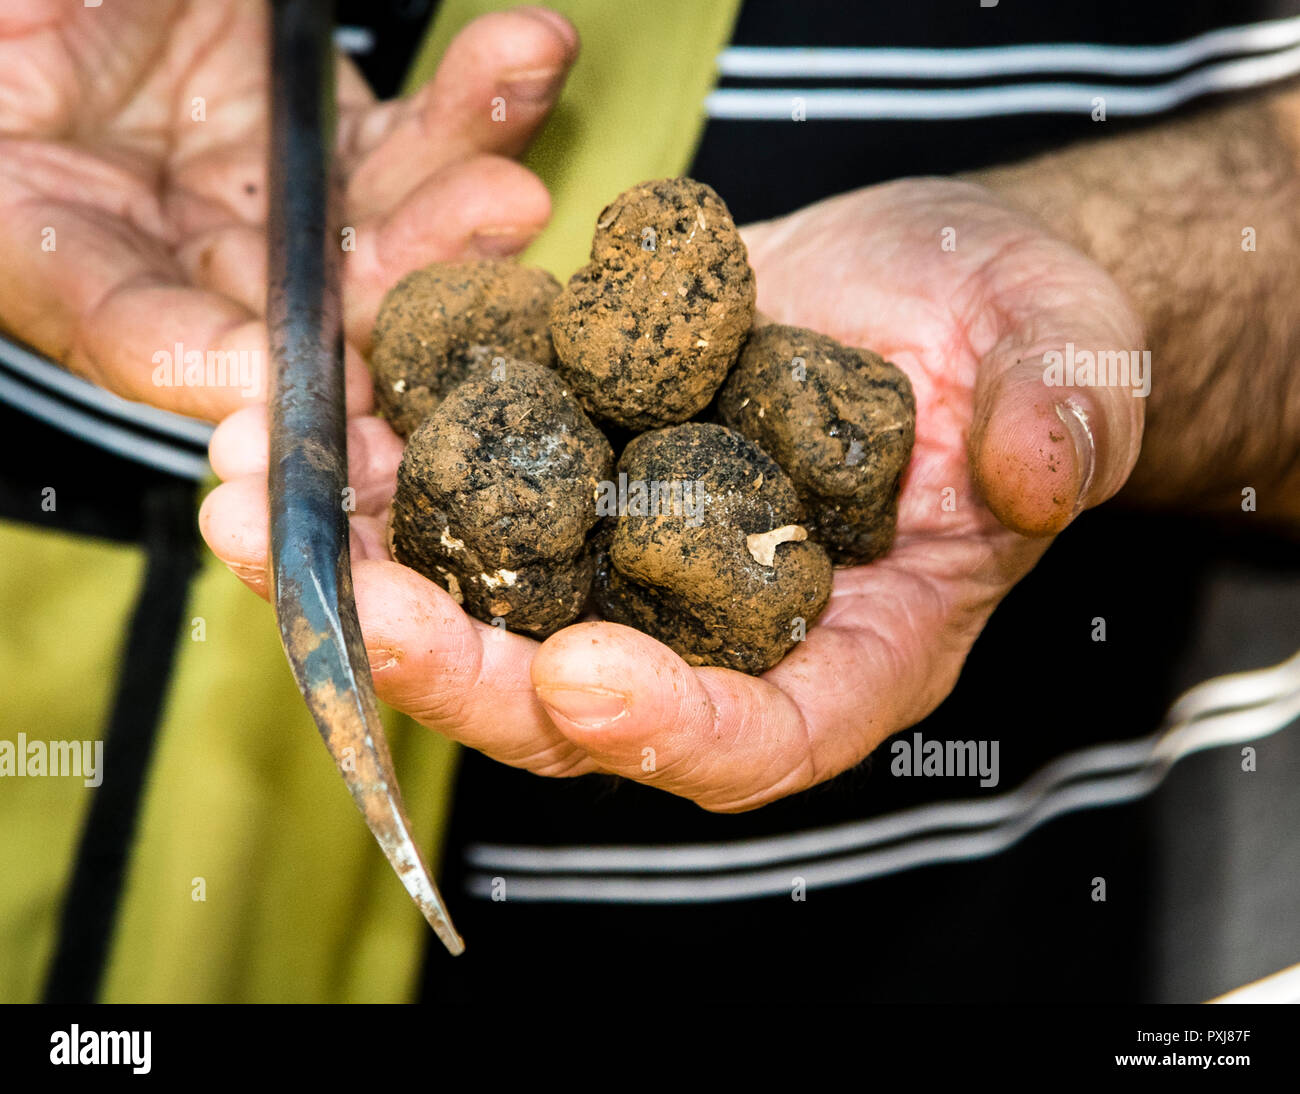 There are 200 species of truffles in the world. One of them: Tuber uncinatum, the Burgundy truffle. Thierry Bezieux had a special tool made. It is shaped like a dog's paw. The truffle expert prefers to dig the last few centimeters himself - because his dogs also appreciate the truffle as a small snack in between meals in Burgundy, France Stock Photo